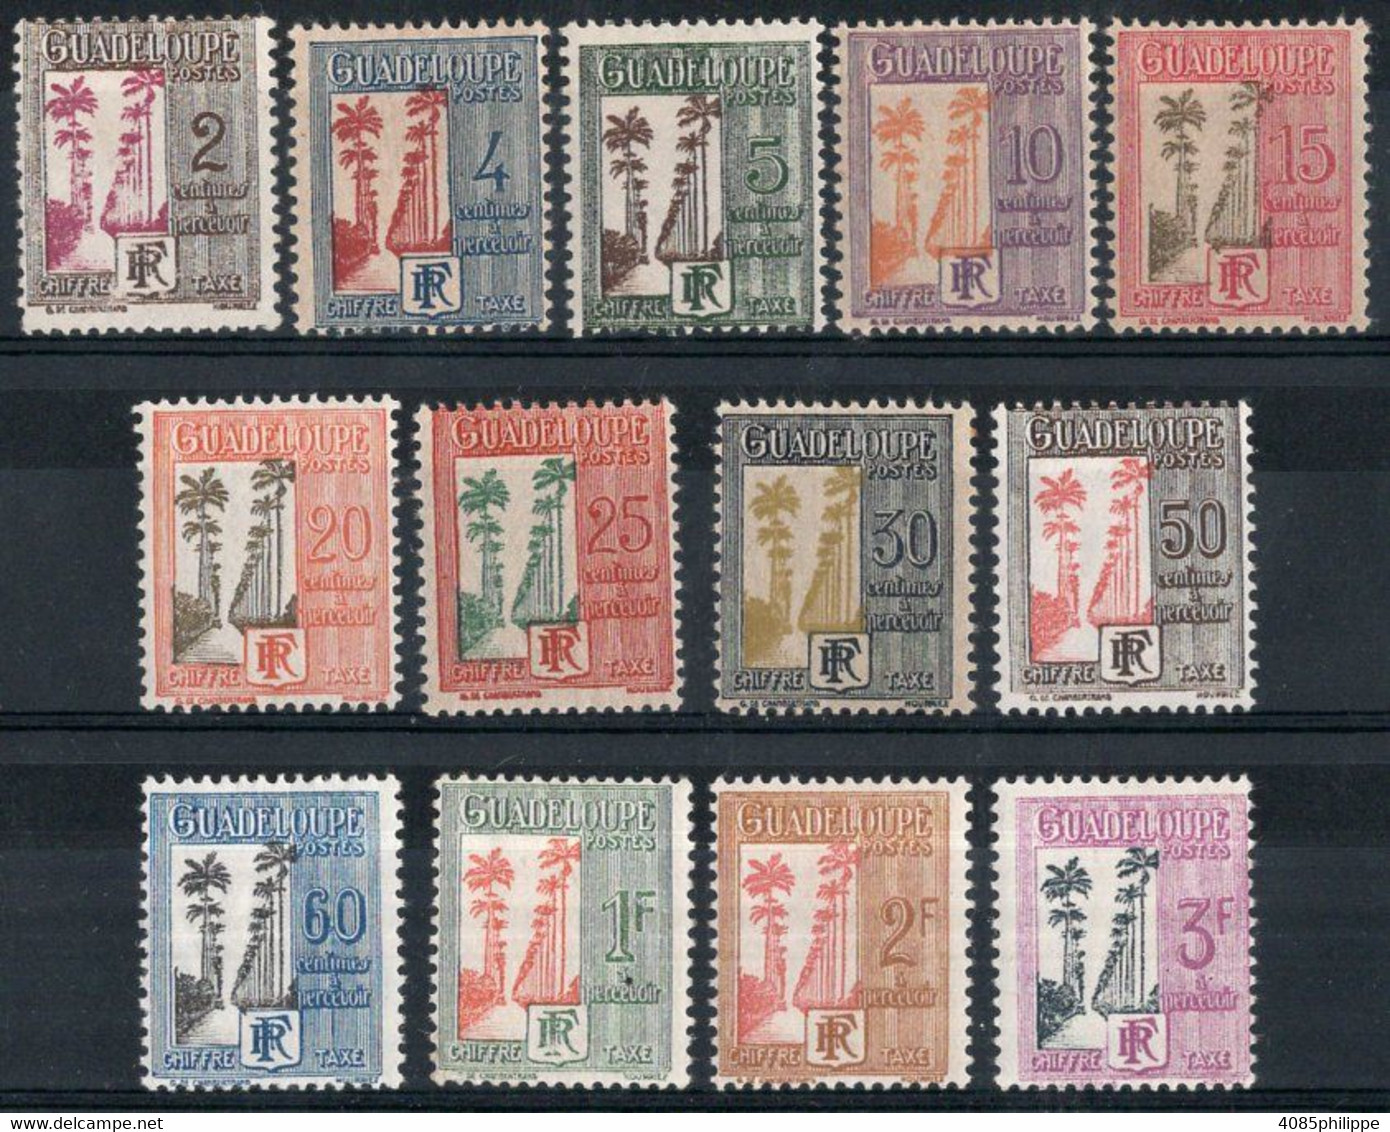 Guadeloupe Timbres-Taxe N°25* à 37*  Neufs Charnières TB Cote 15€00 - Strafport